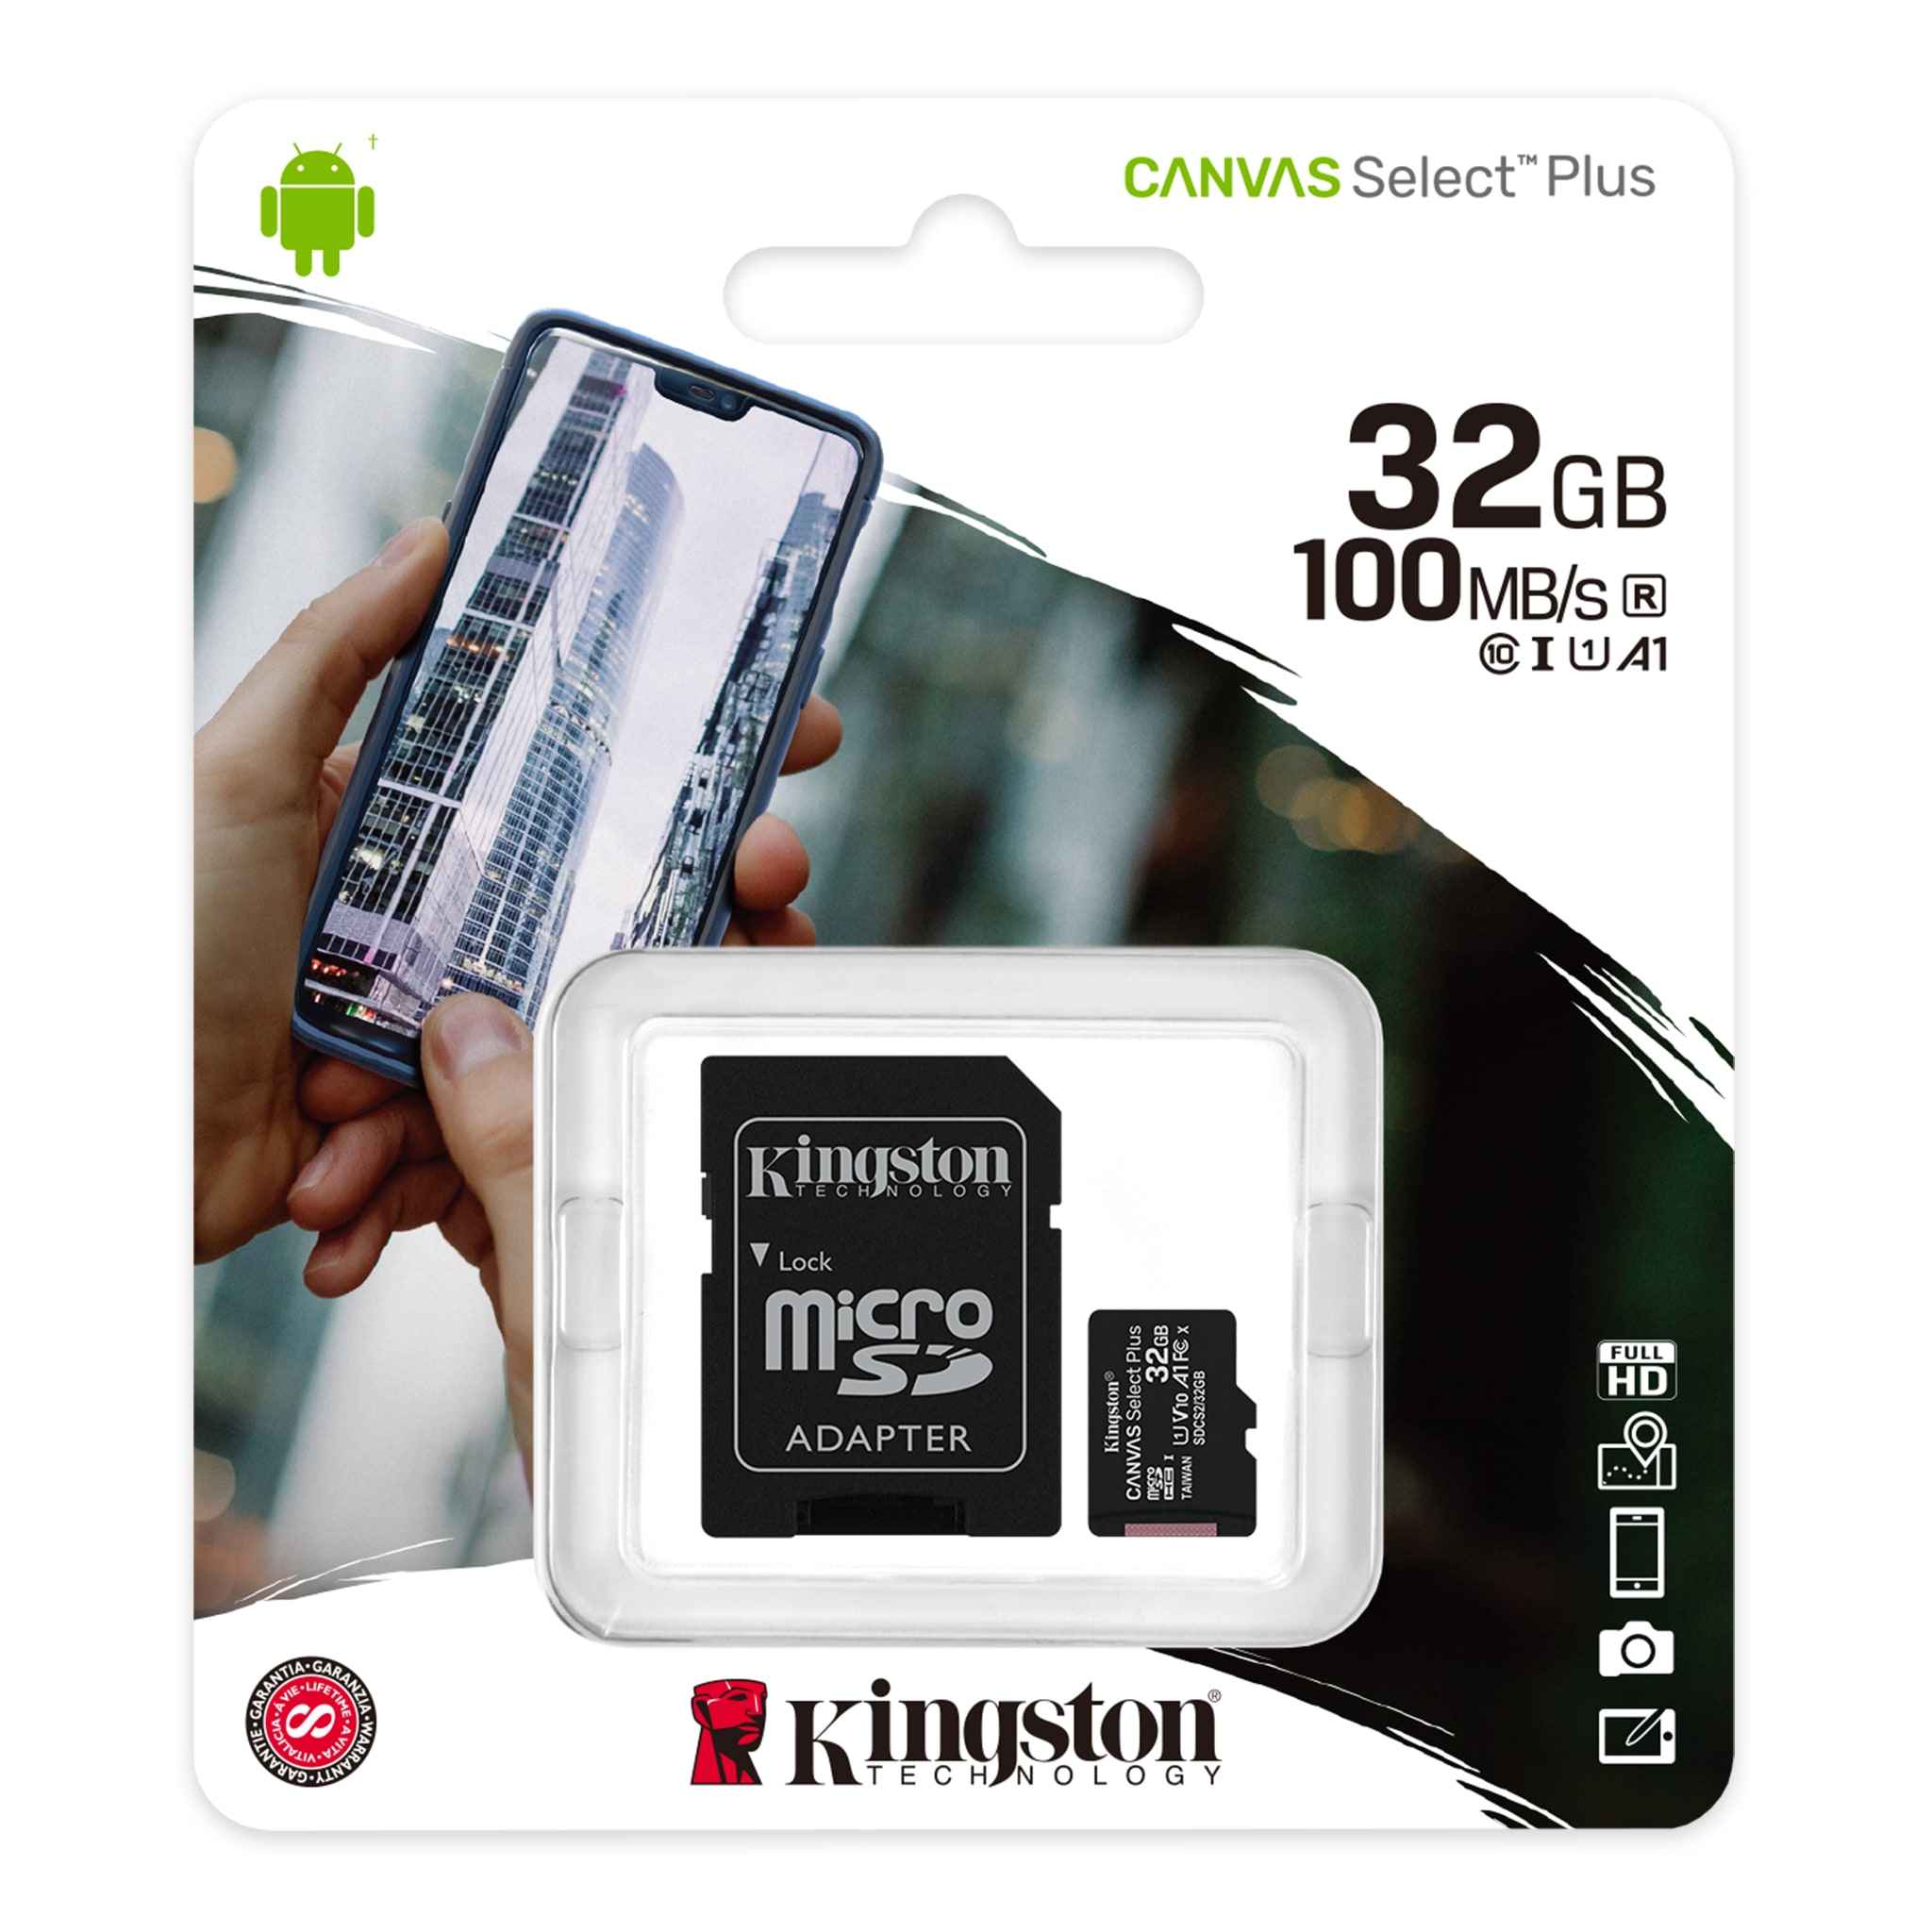 100MBs Works with Kingston Kingston 32GB Videocon Q1 MicroSDHC Canvas Select Plus Card Verified by SanFlash.